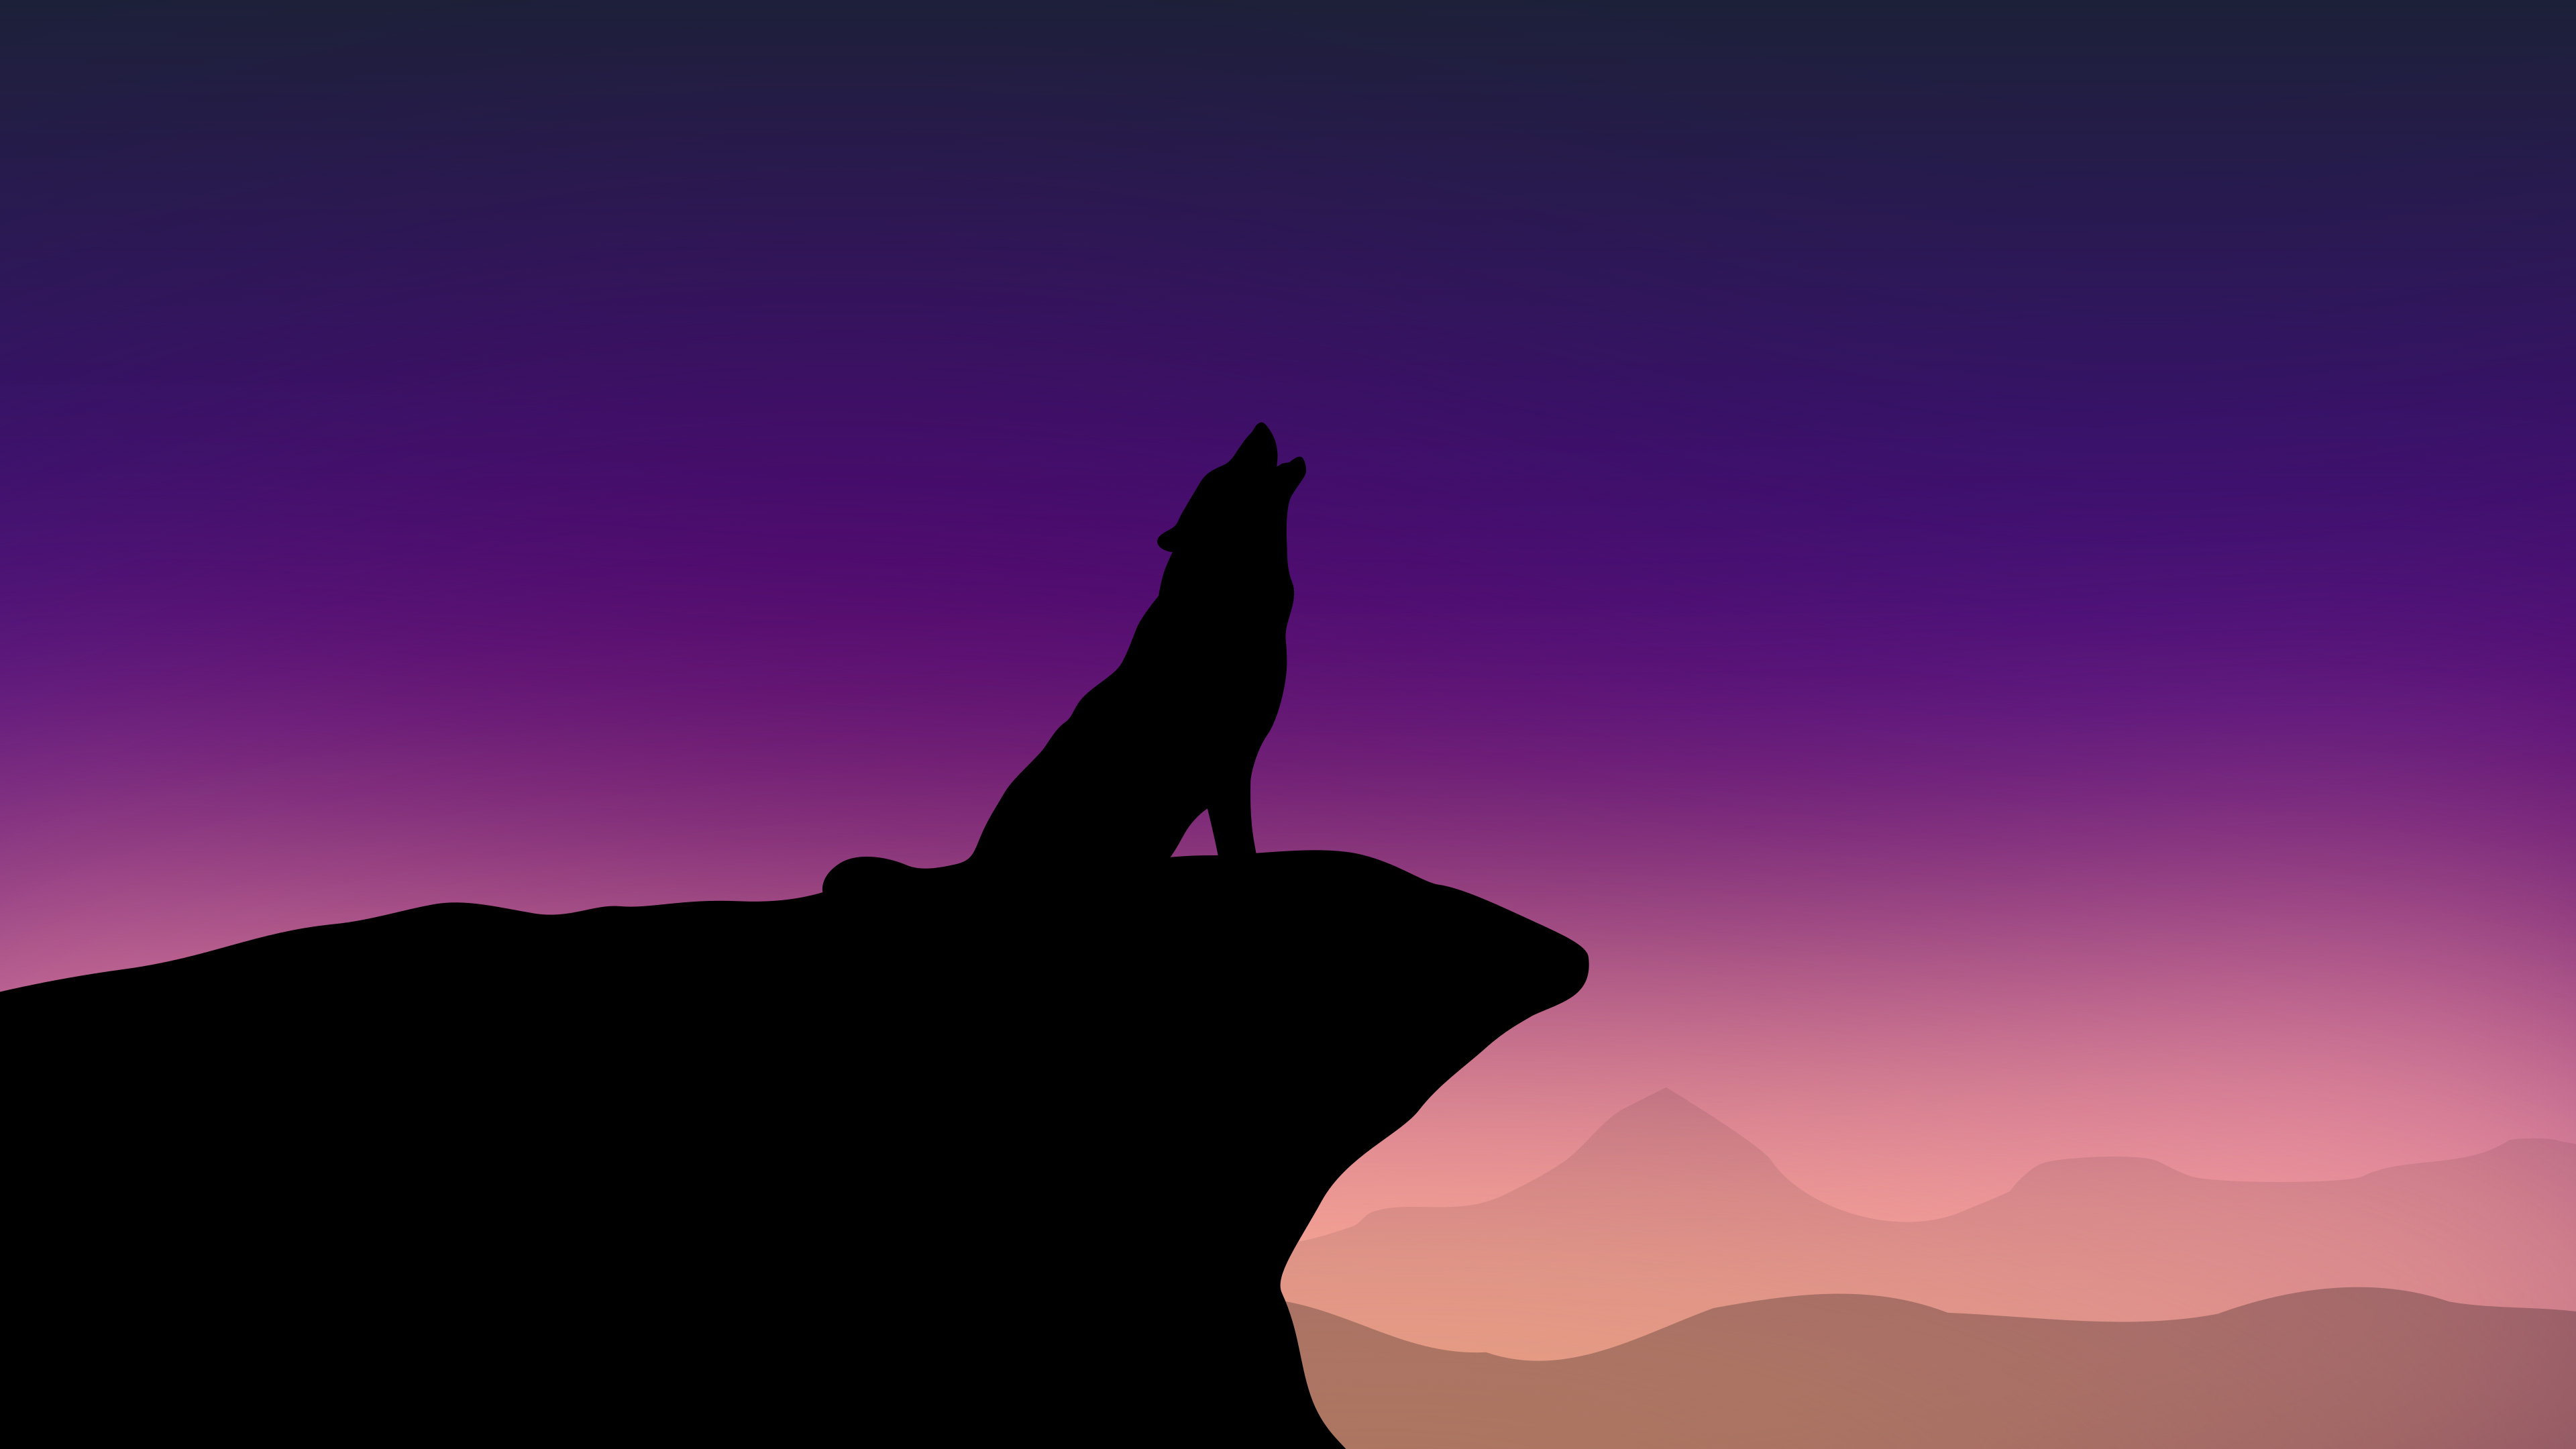 3840x2160 320x240 Howling Wolf Minimalism 4k Apple Iphone,iPod Touch,Galaxy Ace HD 4k Wallpapers, Images, Backgrounds, Photos and Pictures